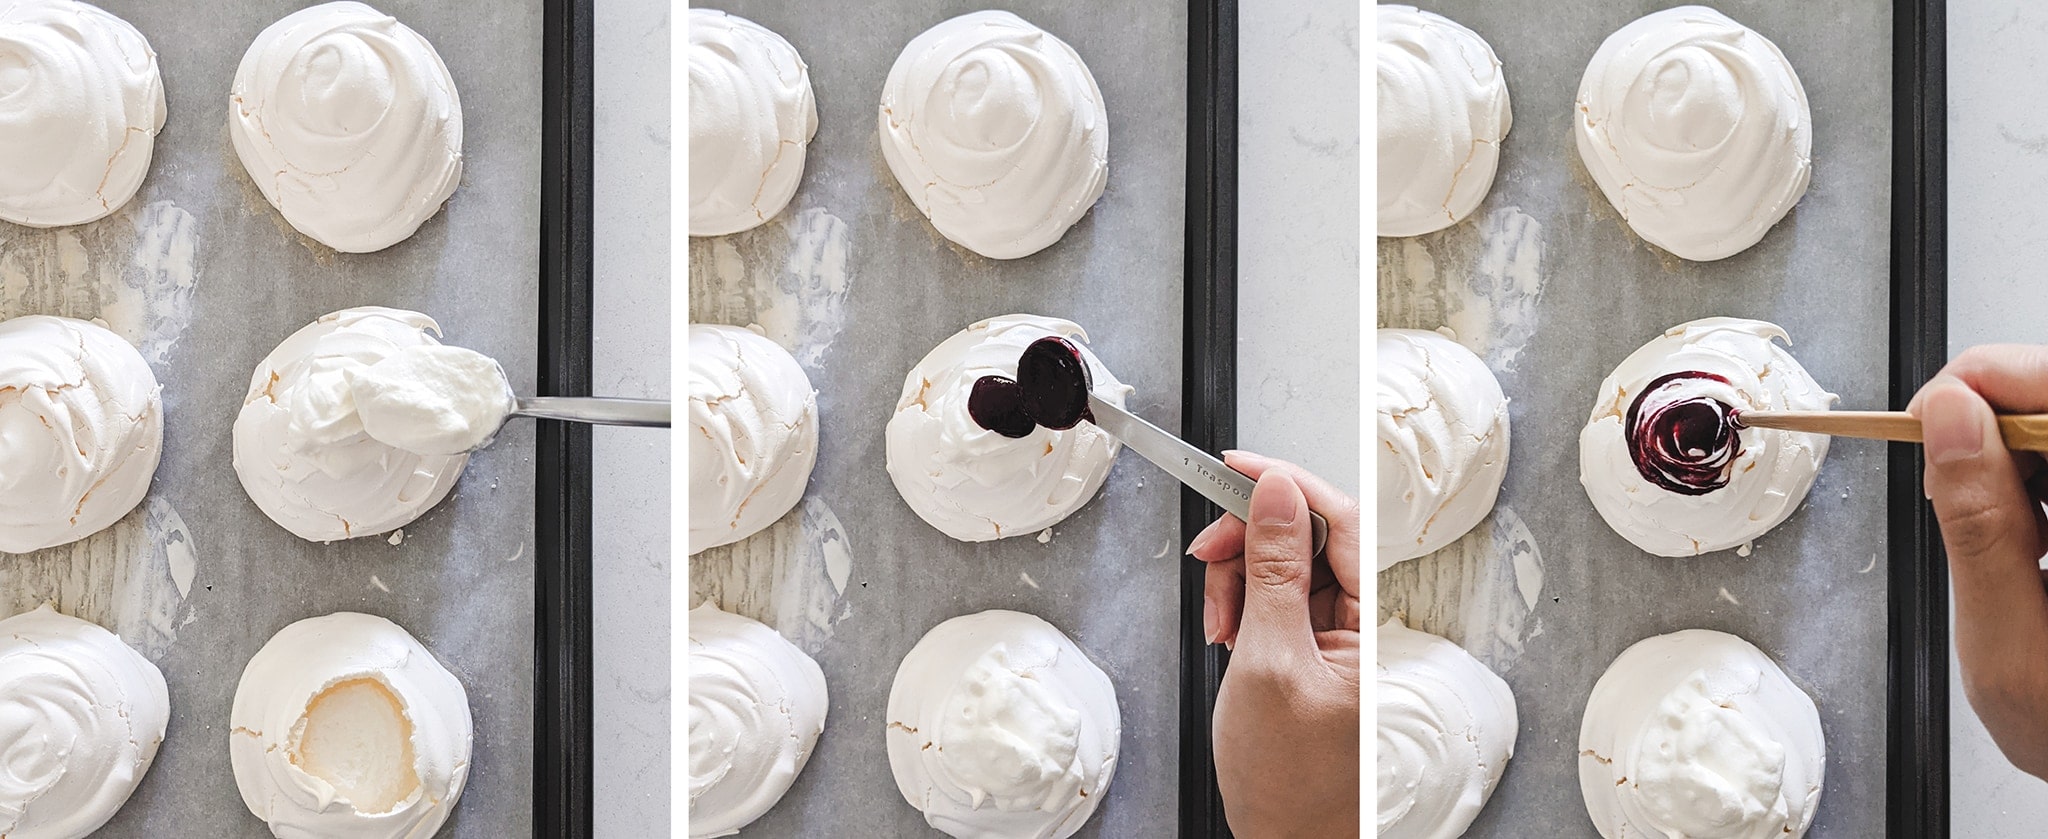 Topping pavlovas with whipped cream and blackberry sauce